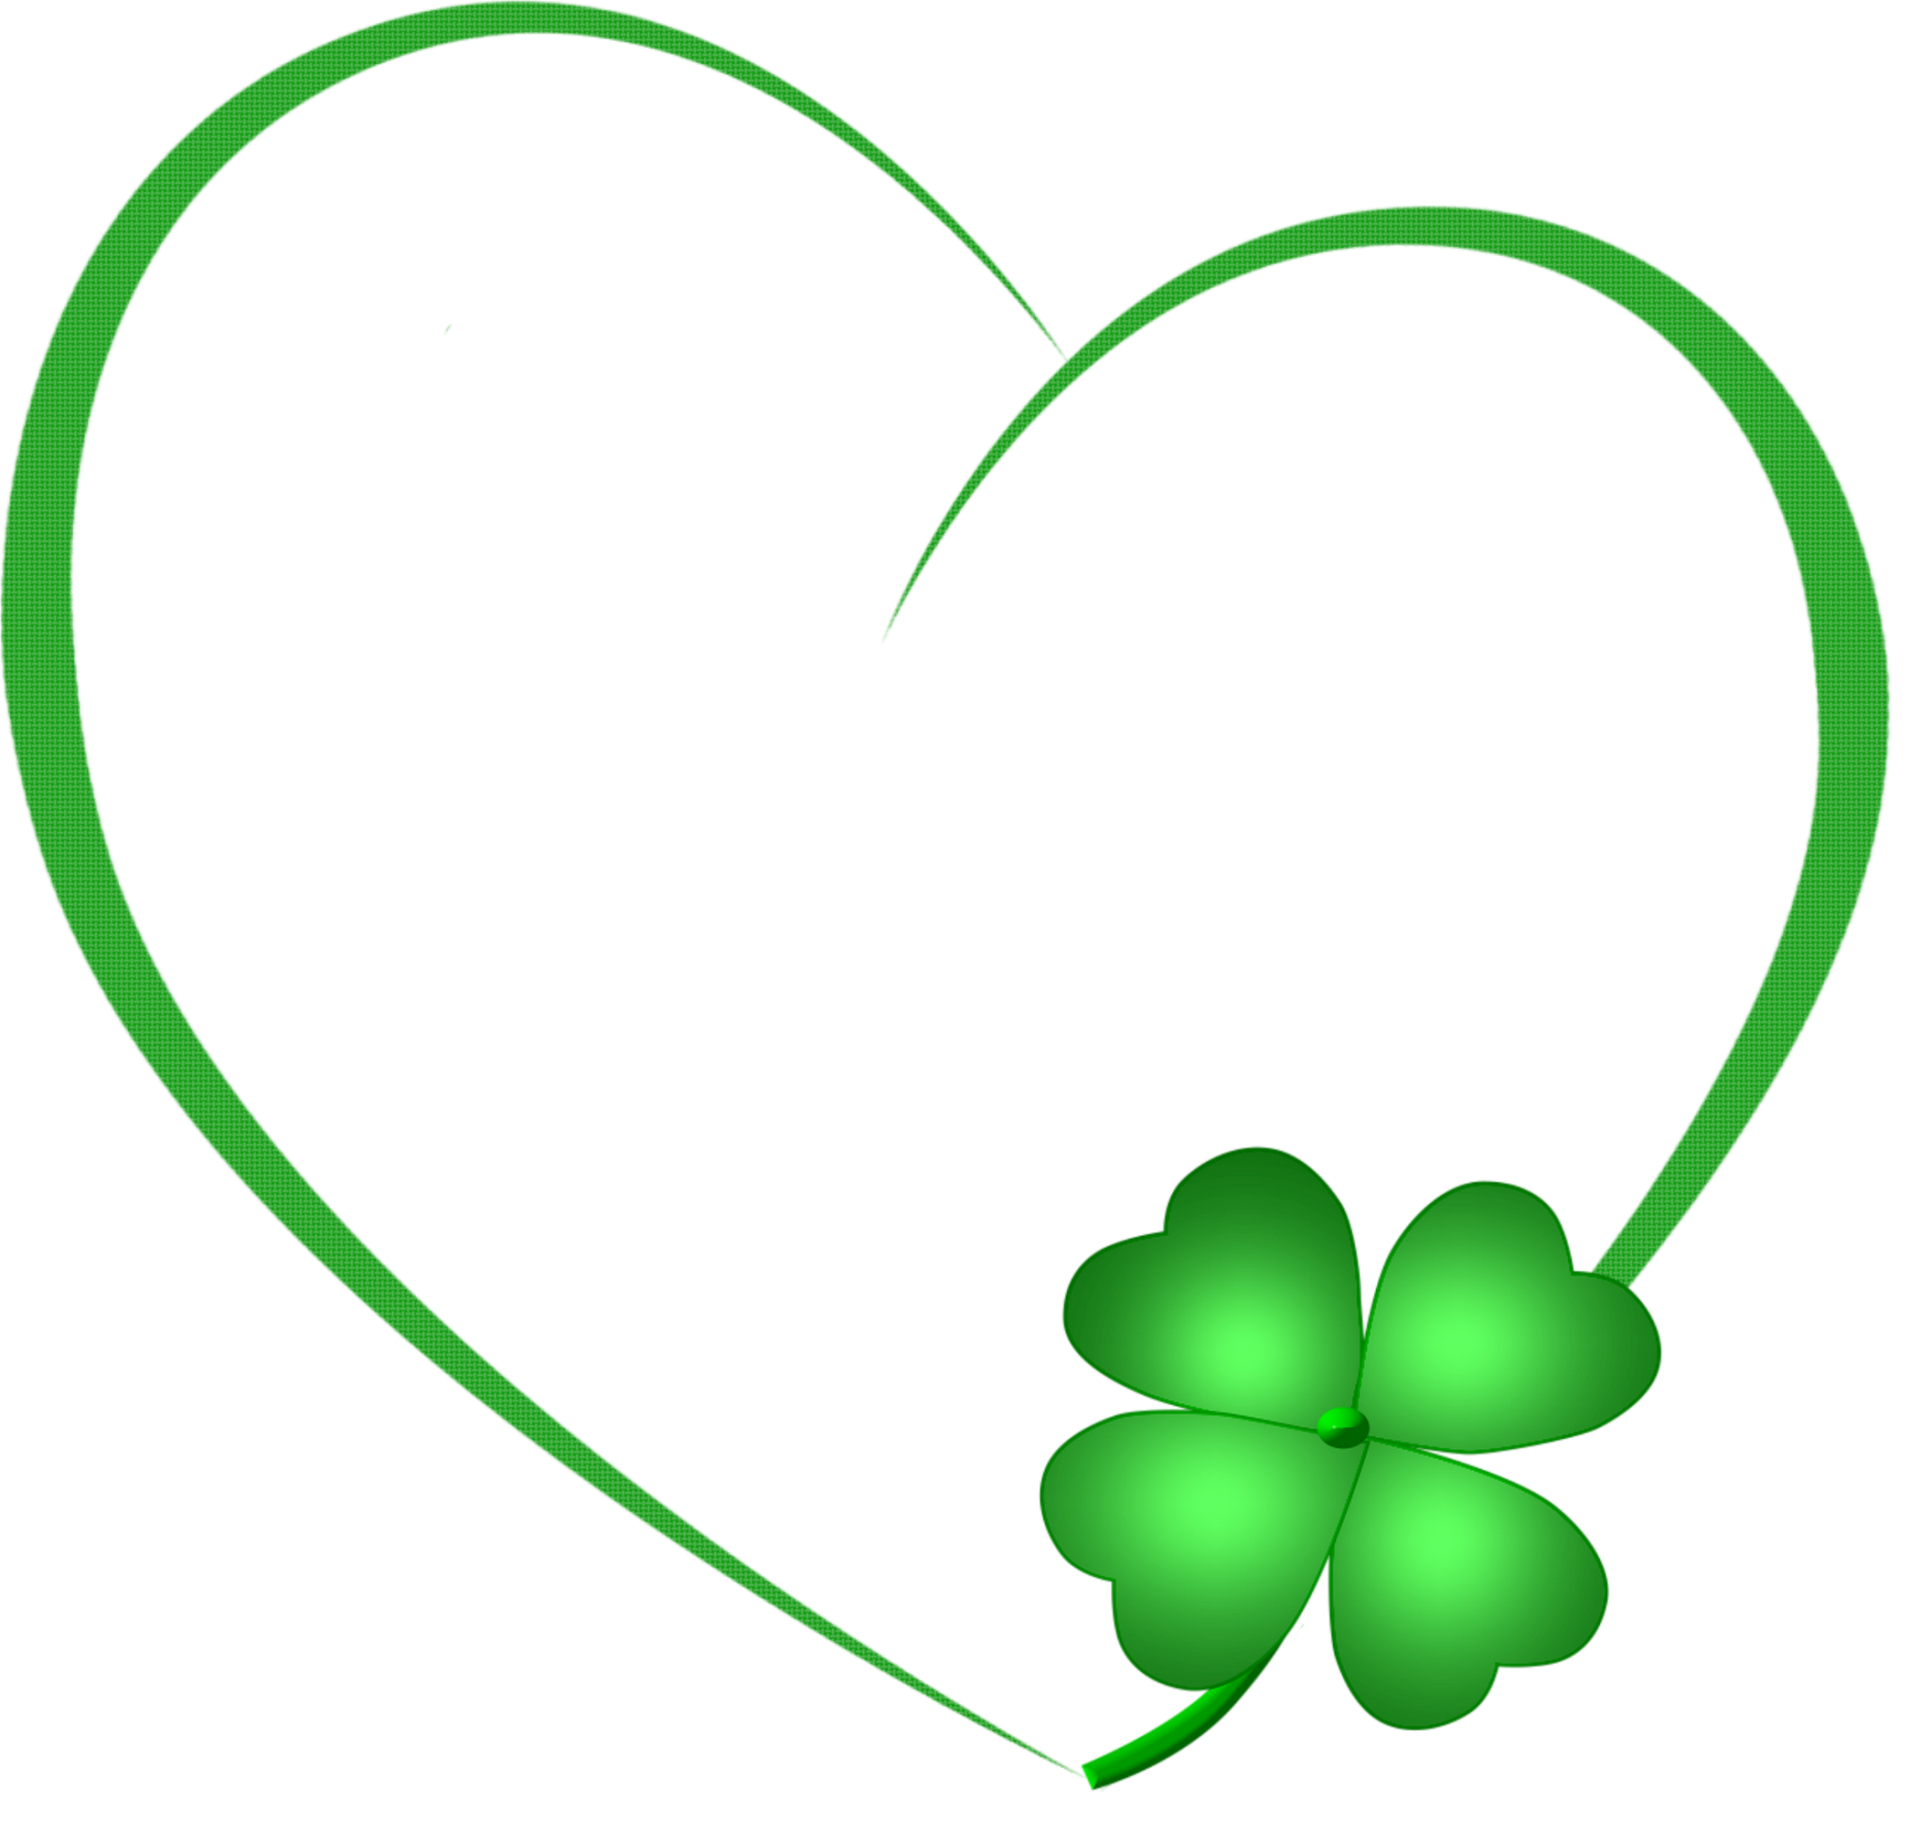 Decorative element representing a heart and a green clover on a transparent background